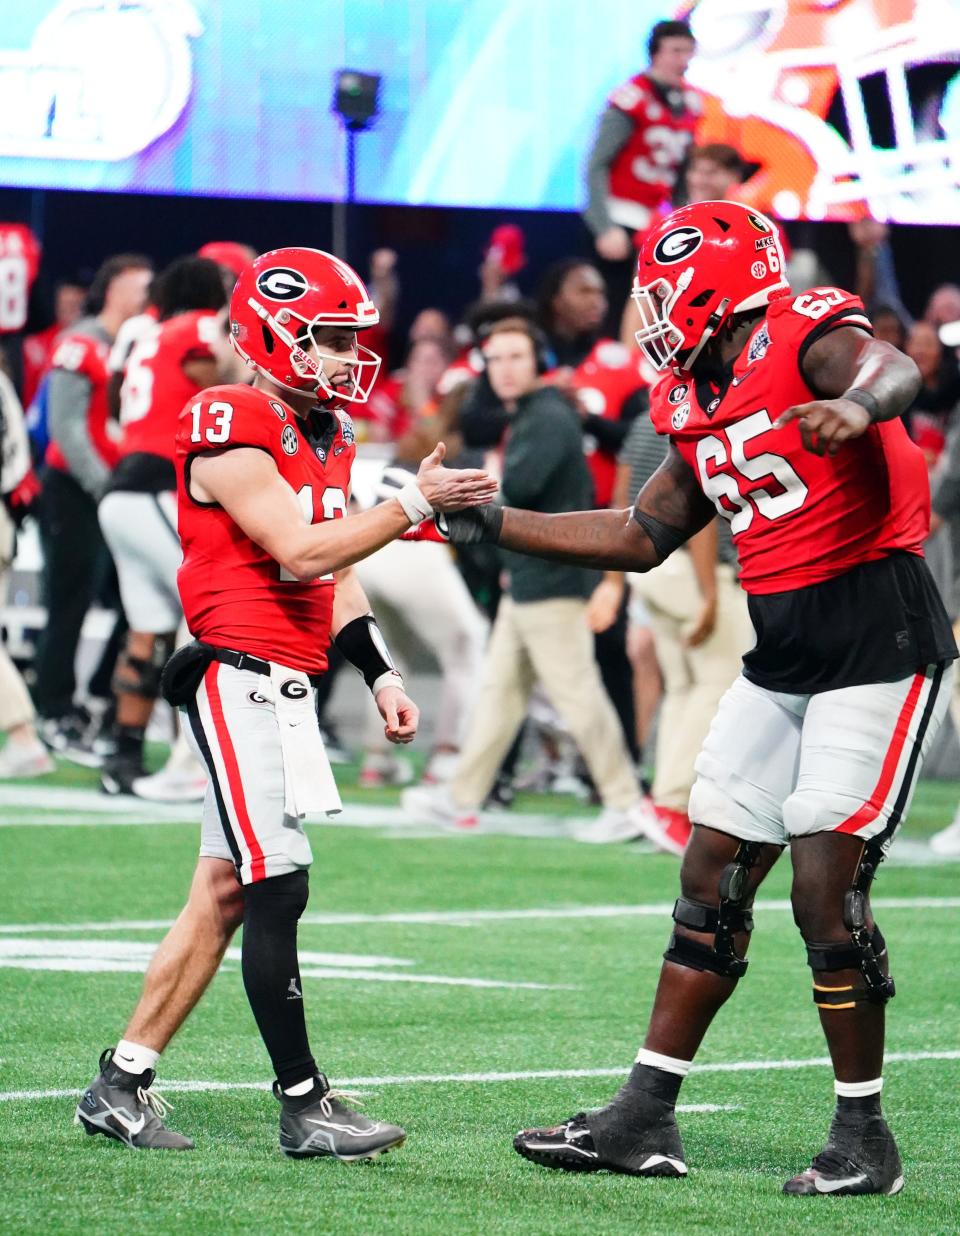 The Bengals drafting  Georgia offensive tackle Amarius Mims instead of perhaps trading up for a defensive lineman, runs counter to a "win now" mentality, Jason Williams writes.